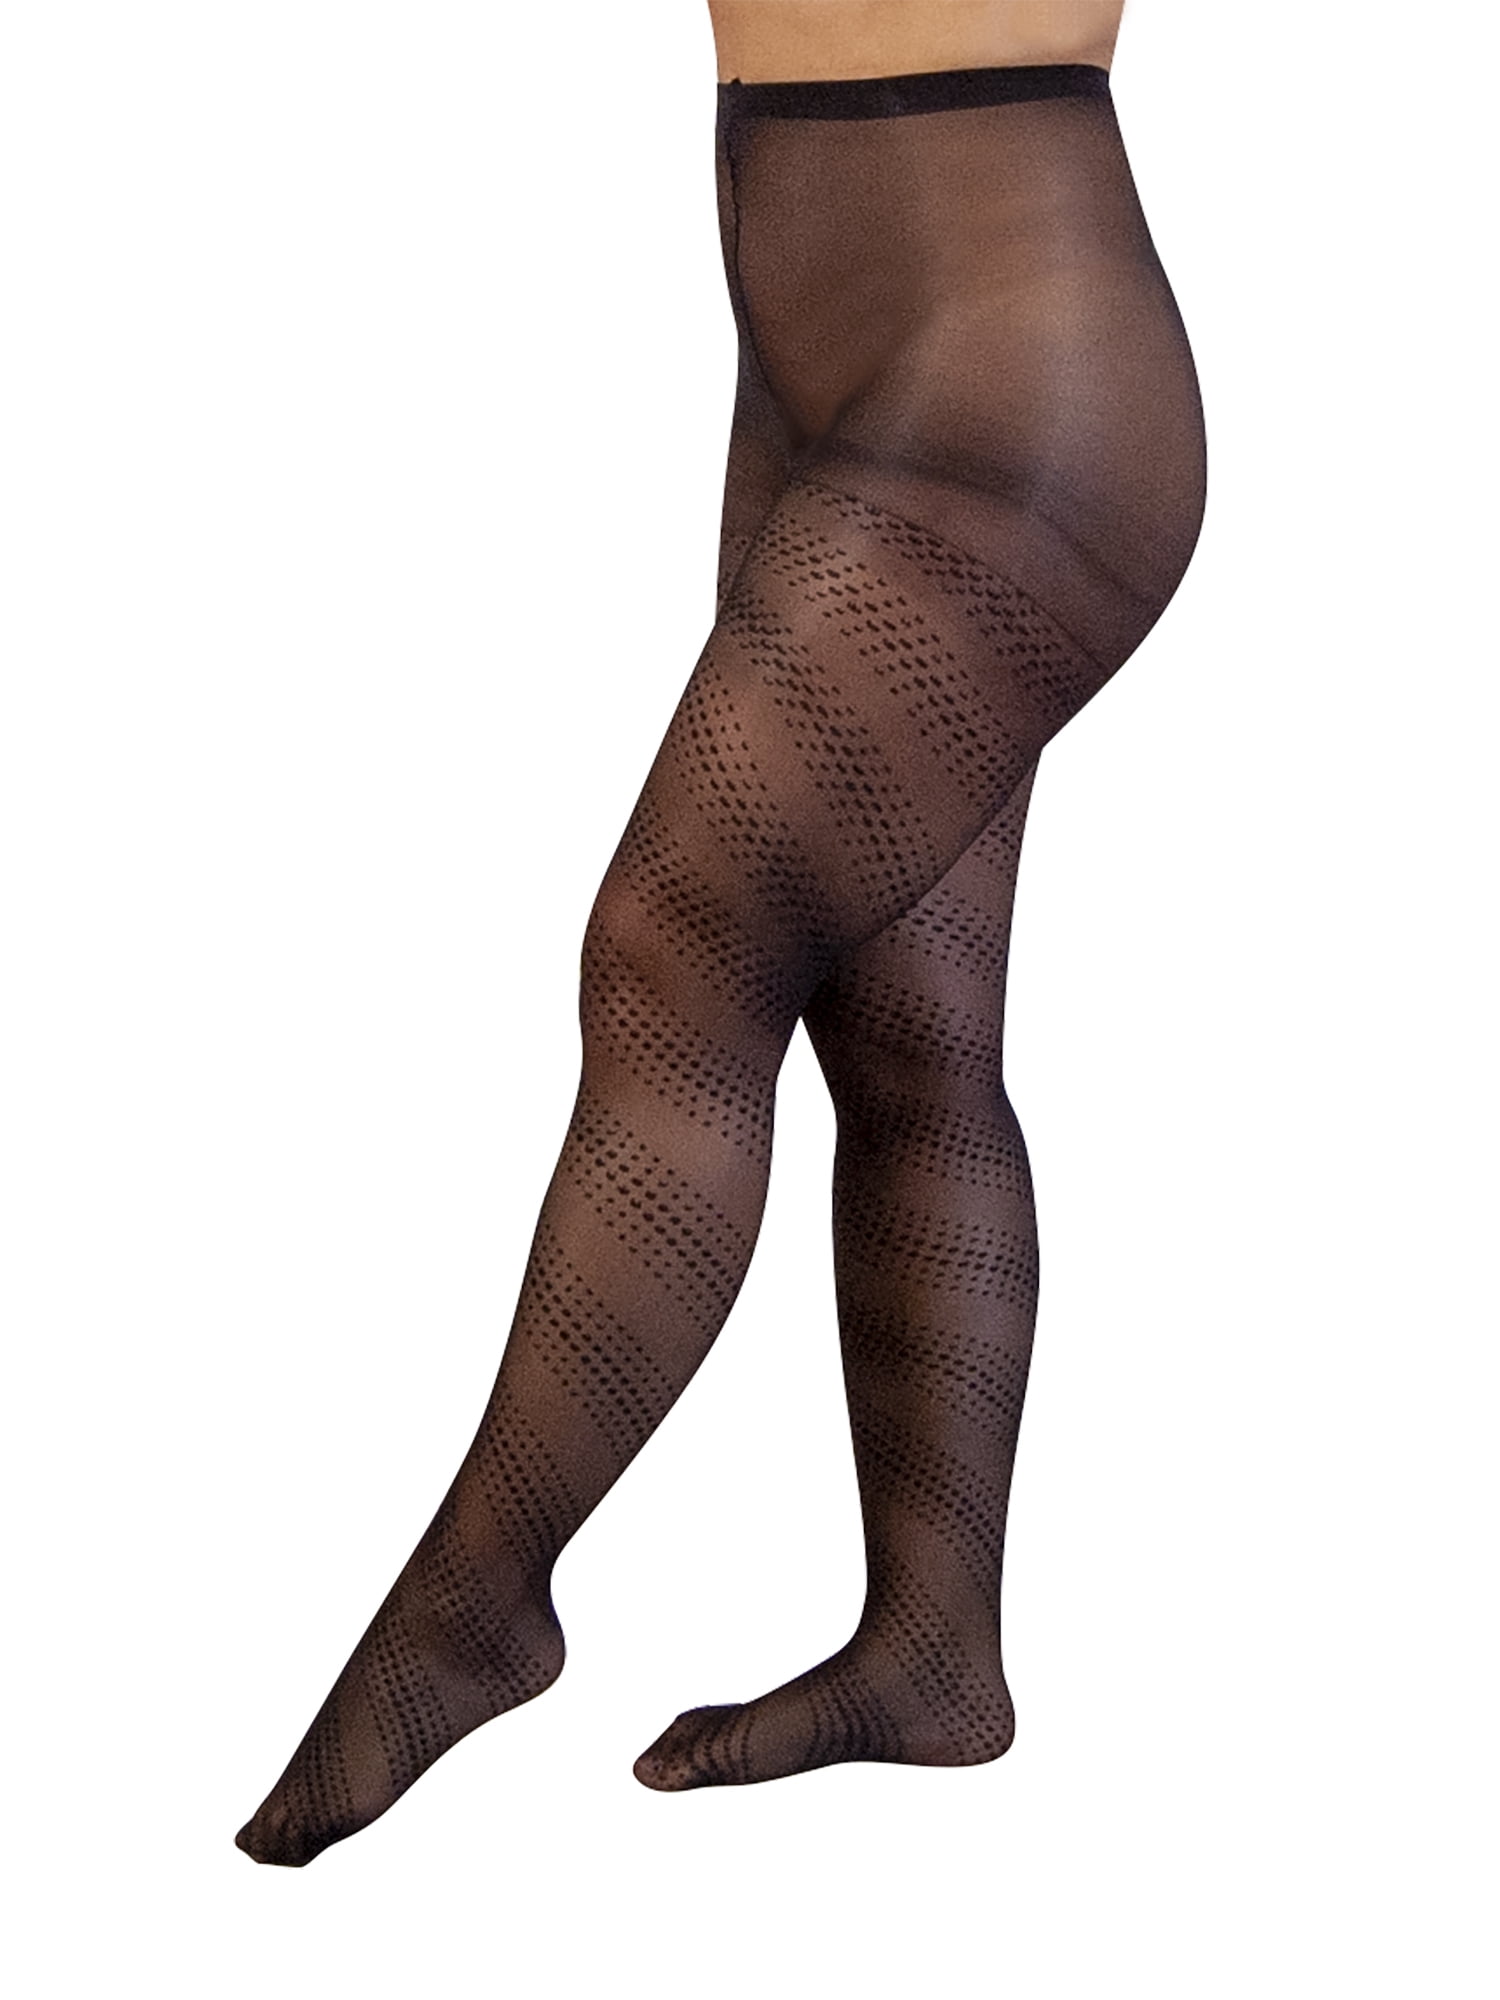 Women's Silk Impressions Spiral Dot Tights, 3-Pack 